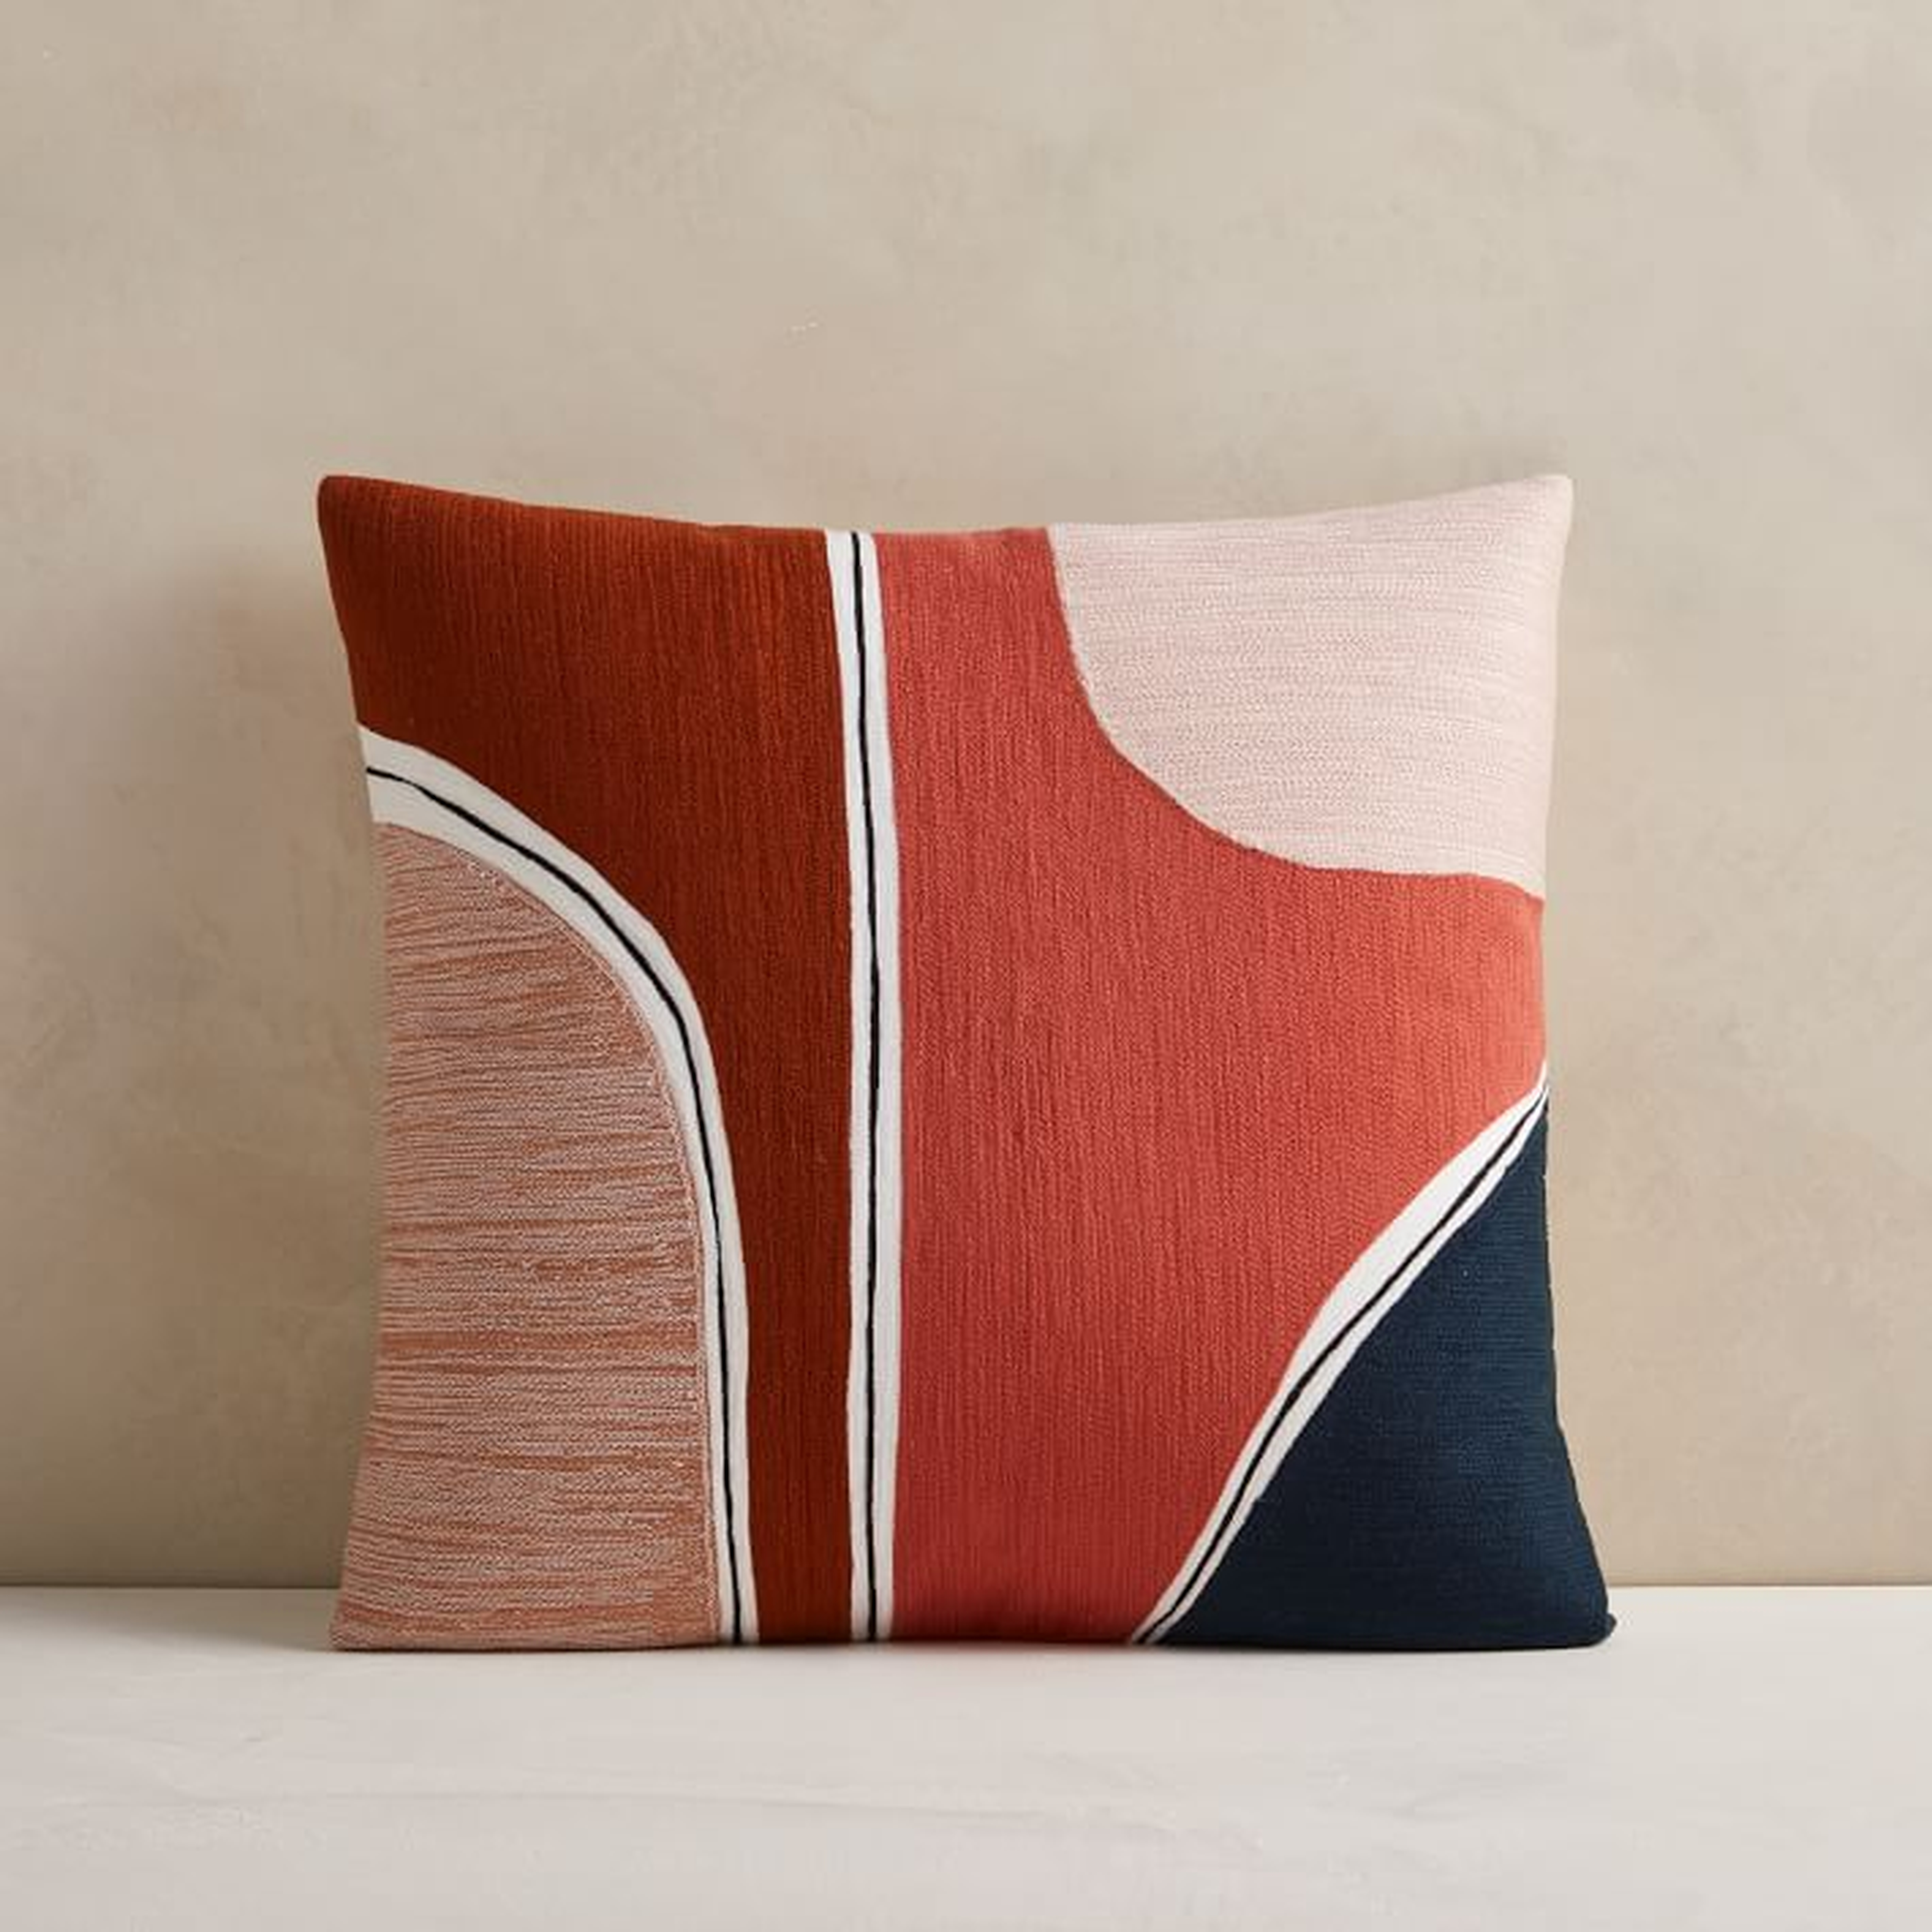 Crewel Outlined Shapes Pillow Cover - West Elm